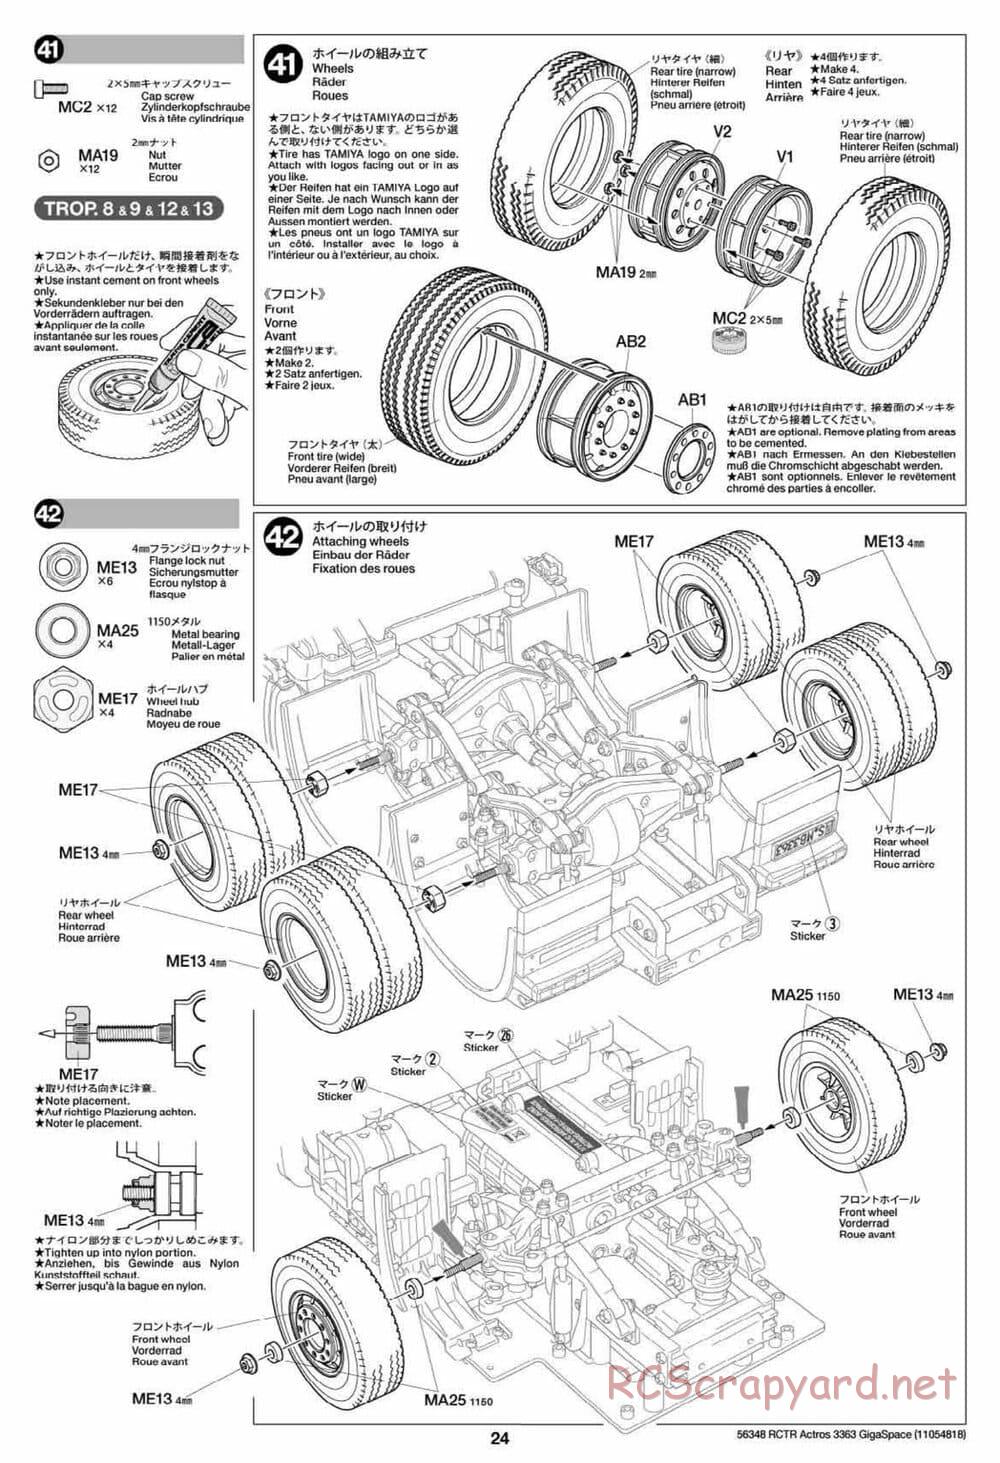 Tamiya - Mercedes-Benz Actros 3363 6x4 GigaSpace Tractor Truck Chassis - Manual - Page 24